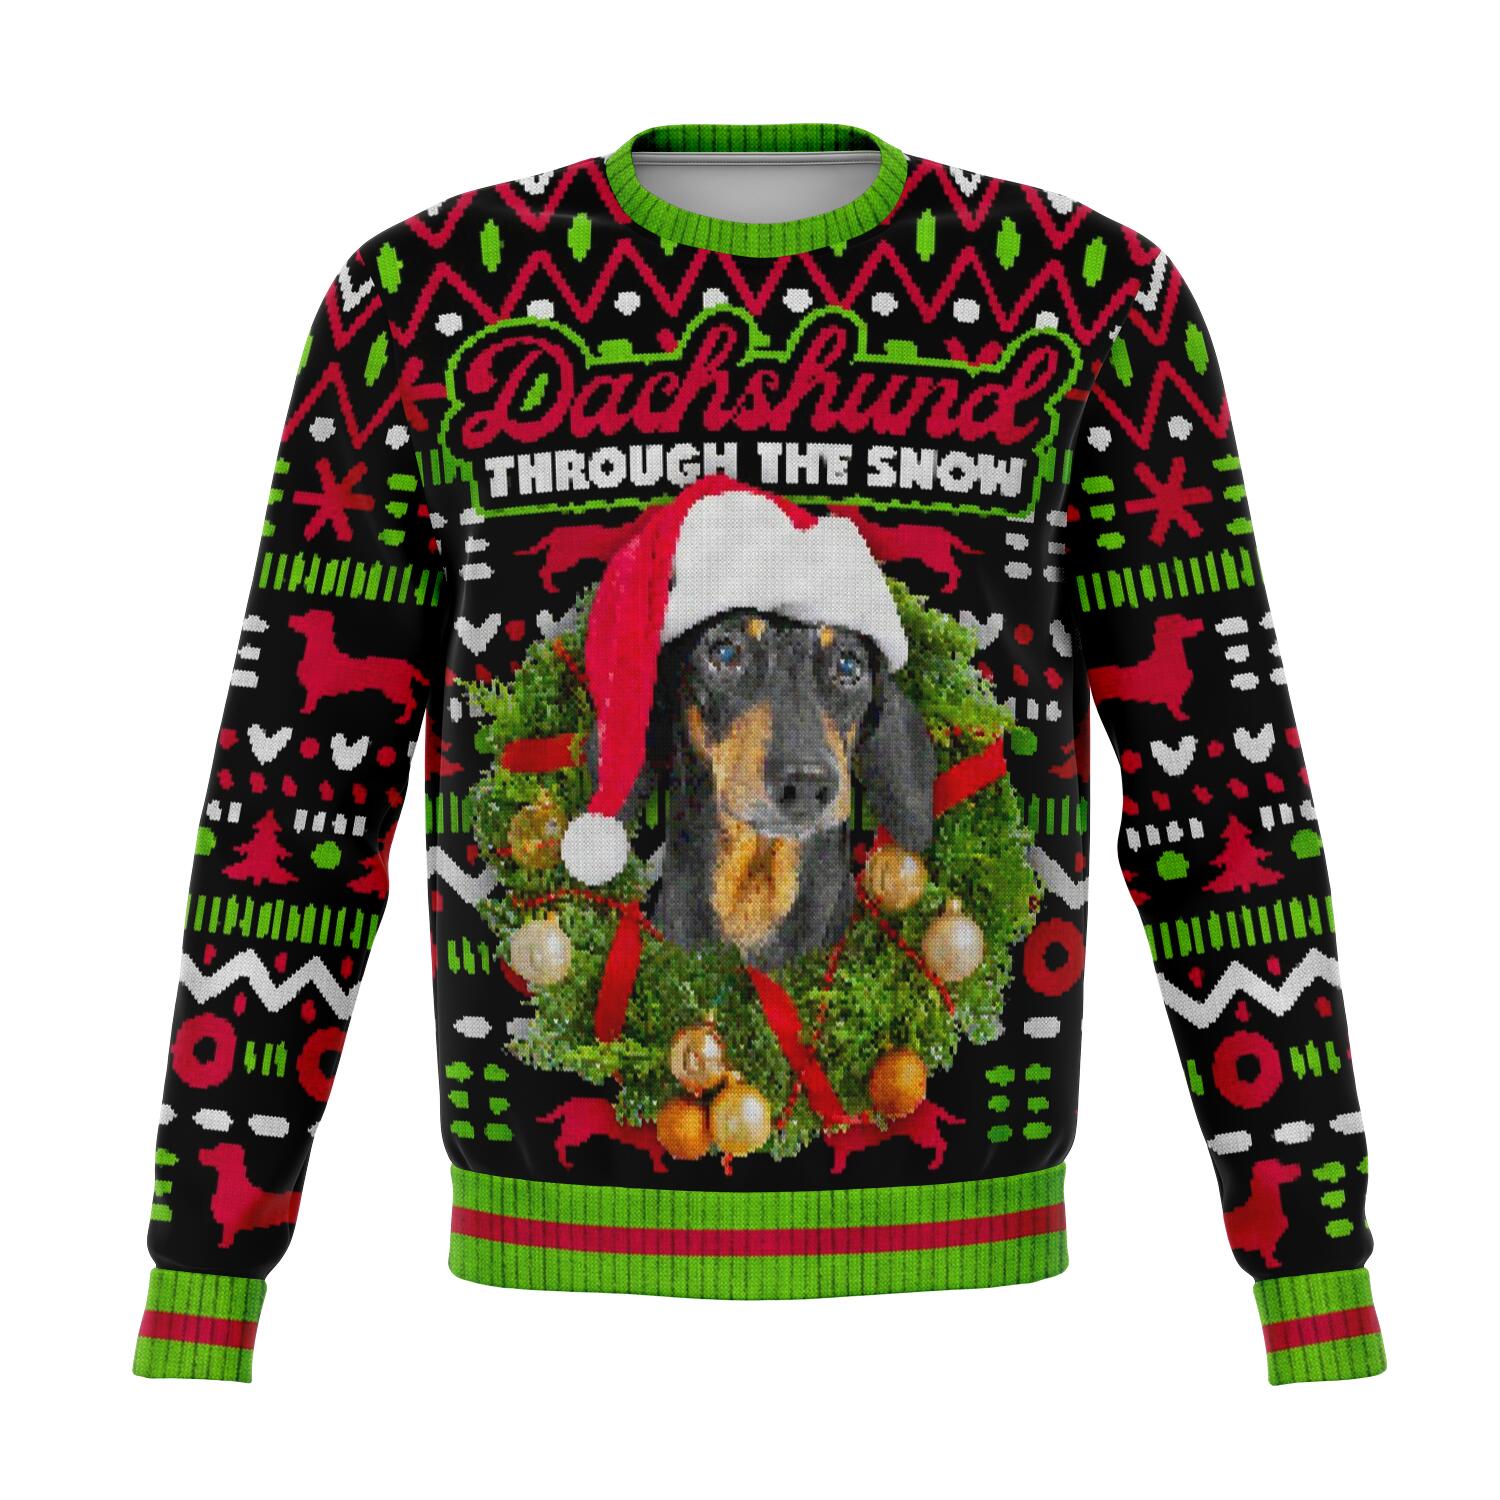 Dachshund Ugly Christmas Sweater, Dog Through the Snow Funny Print Party Sweatshirt Holiday Men Women Christmas Gift Plus Size Starcove Fashion